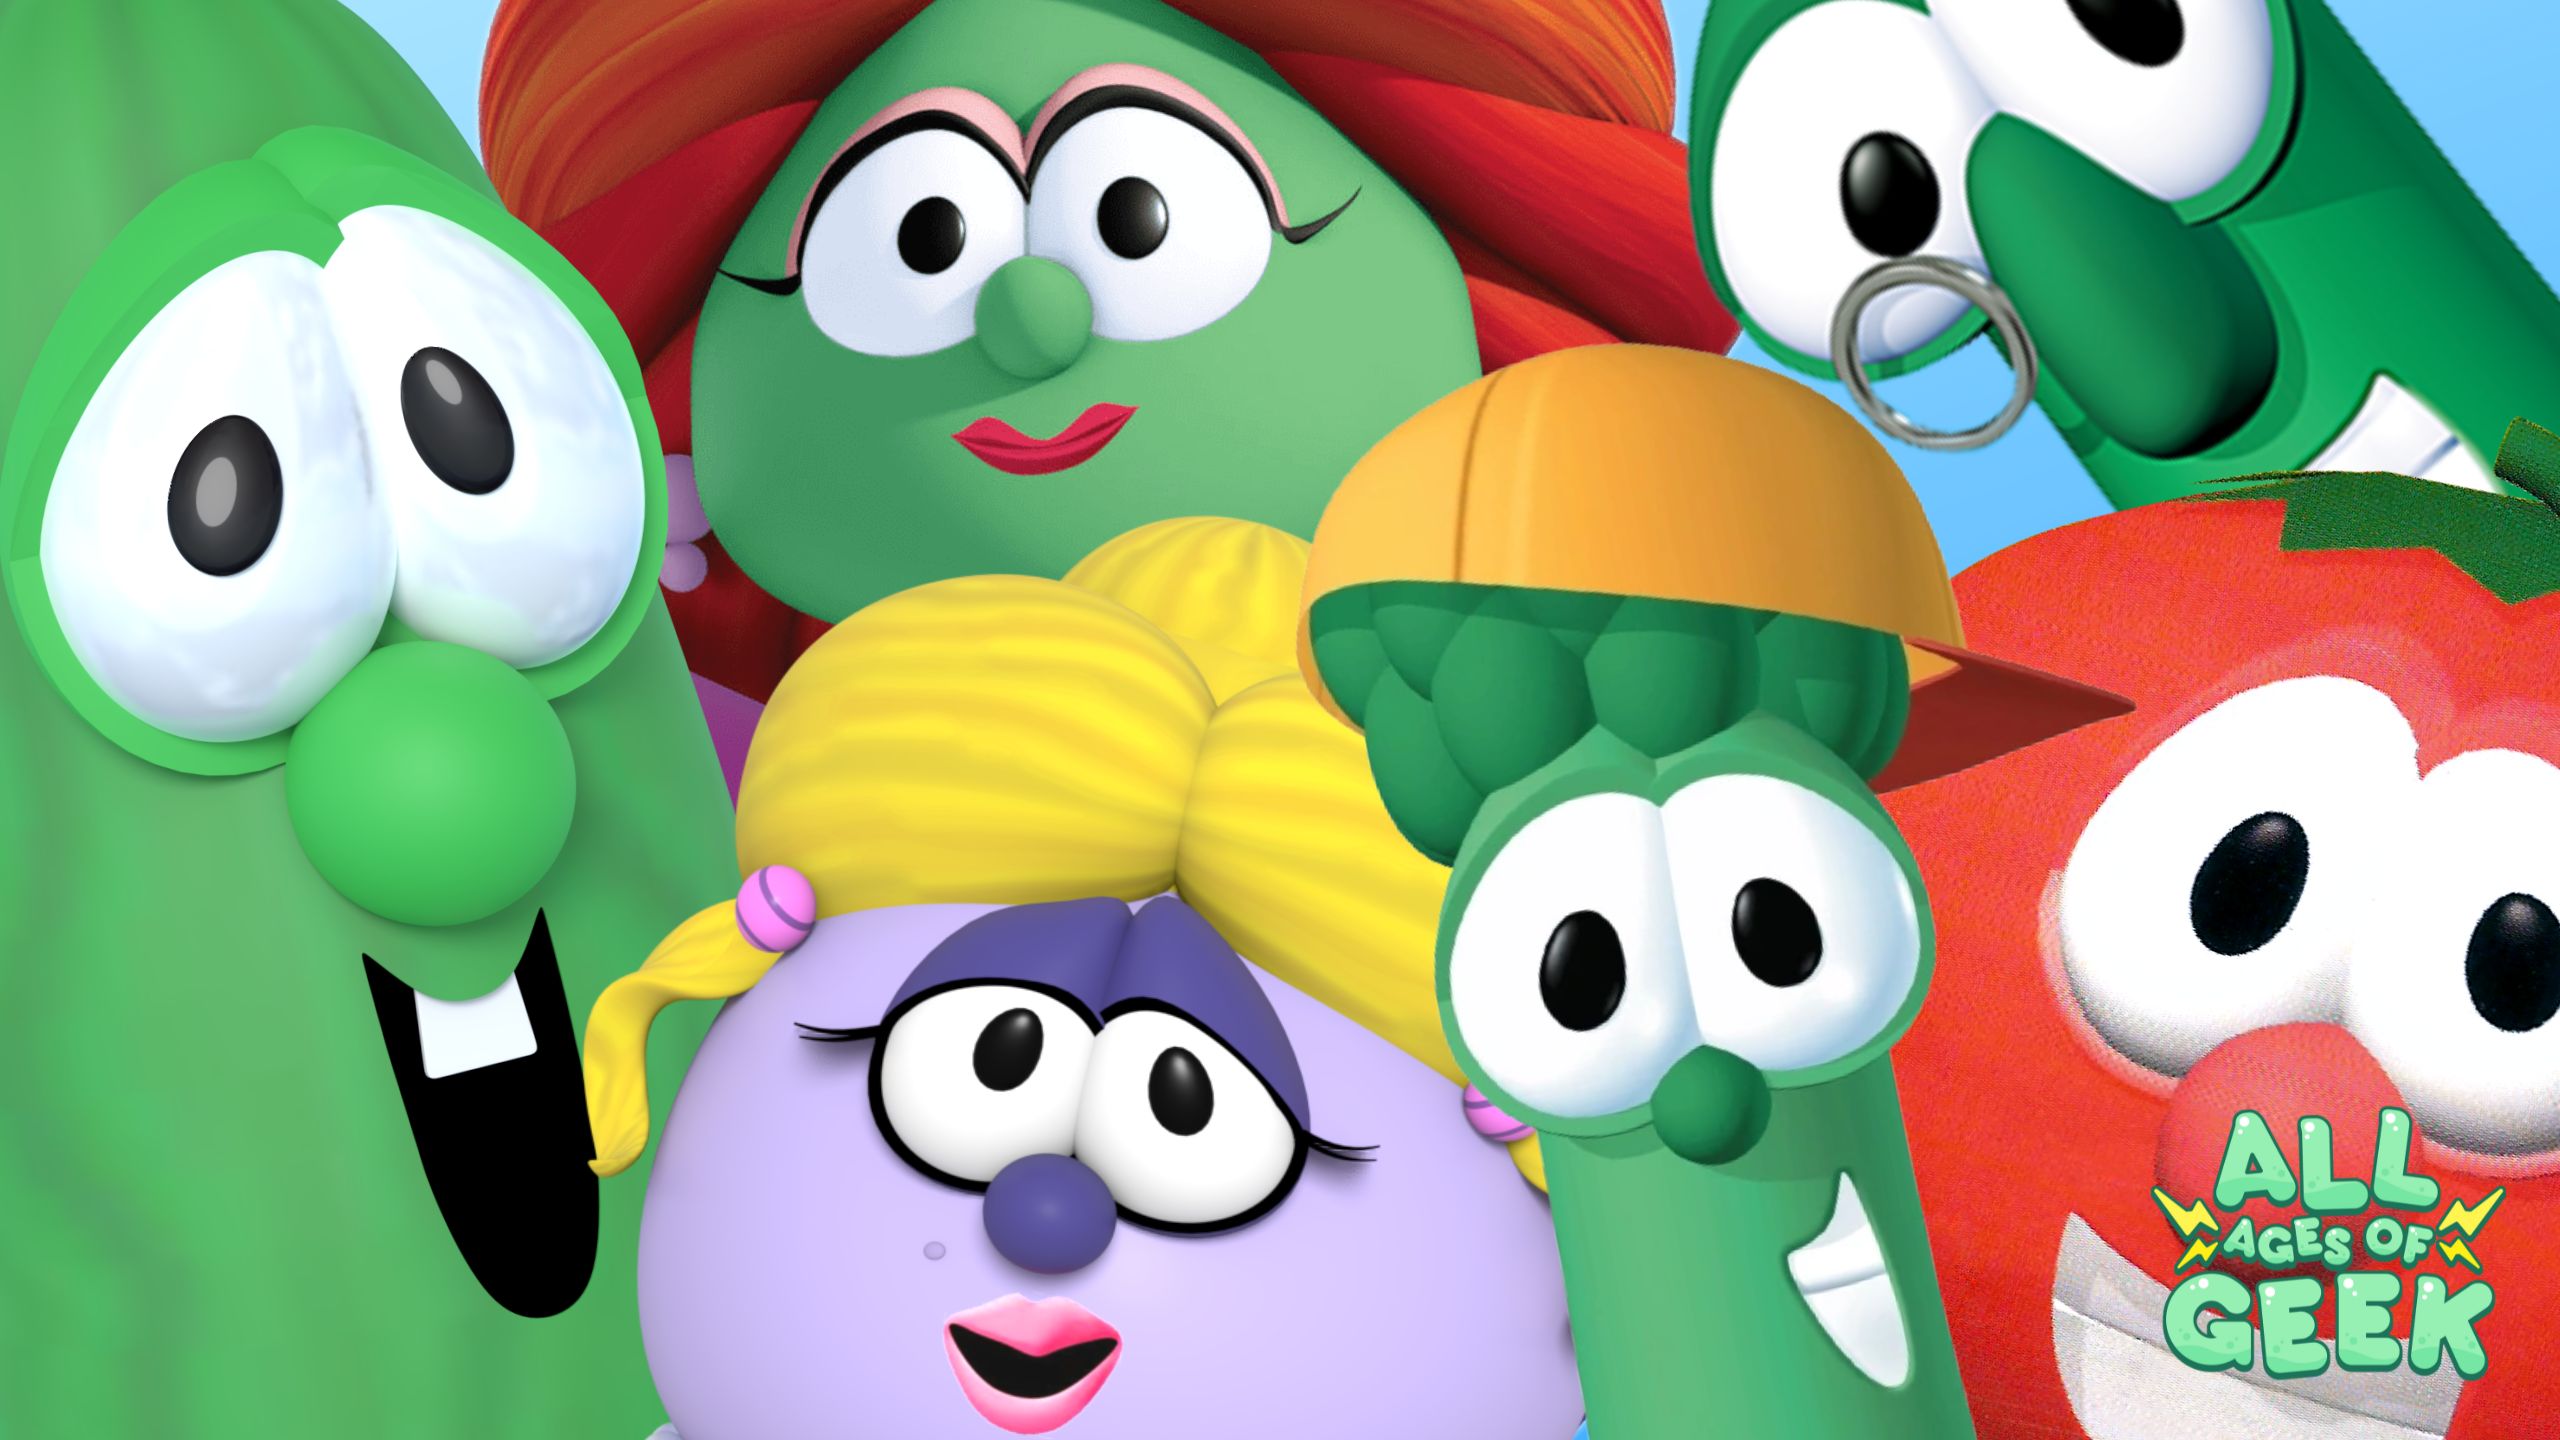 A colorful group shot of VeggieTales characters, including Bob the Tomato, Larry the Cucumber, Junior Asparagus, Madame Blueberry, and Petunia Rhubarb. They are all smiling and looking directly at the camera, set against a bright blue background. The All Ages of Geek logo is visible in the bottom right corner, adding a playful touch to the image.